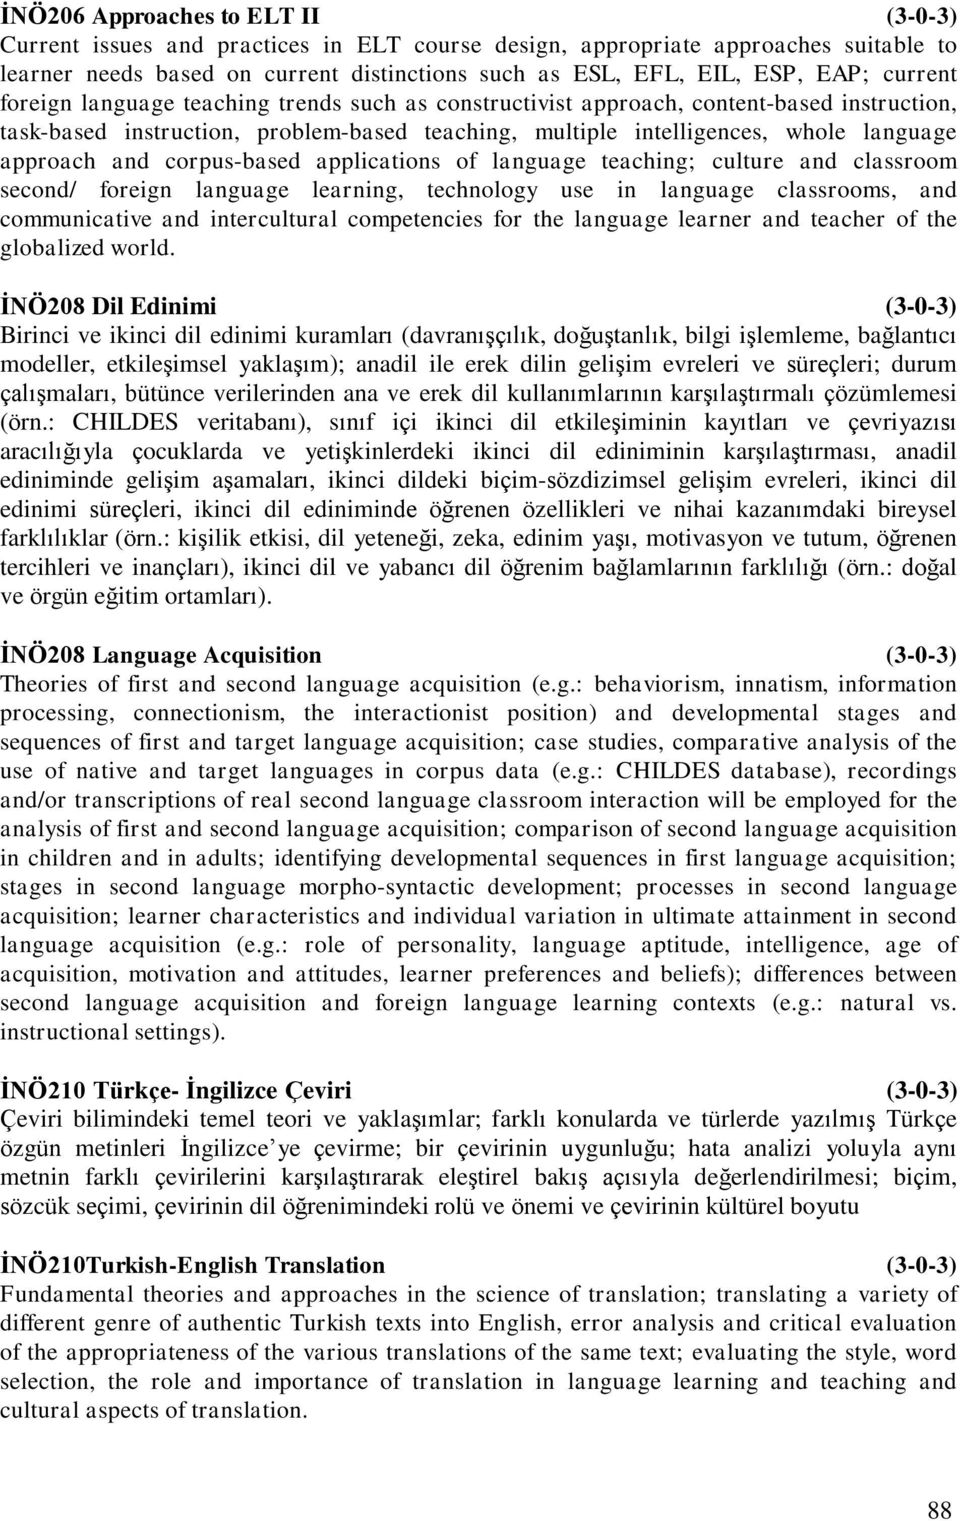 and corpus-based applications of language teaching; culture and classroom second/ foreign language learning, technology use in language classrooms, and communicative and intercultural competencies